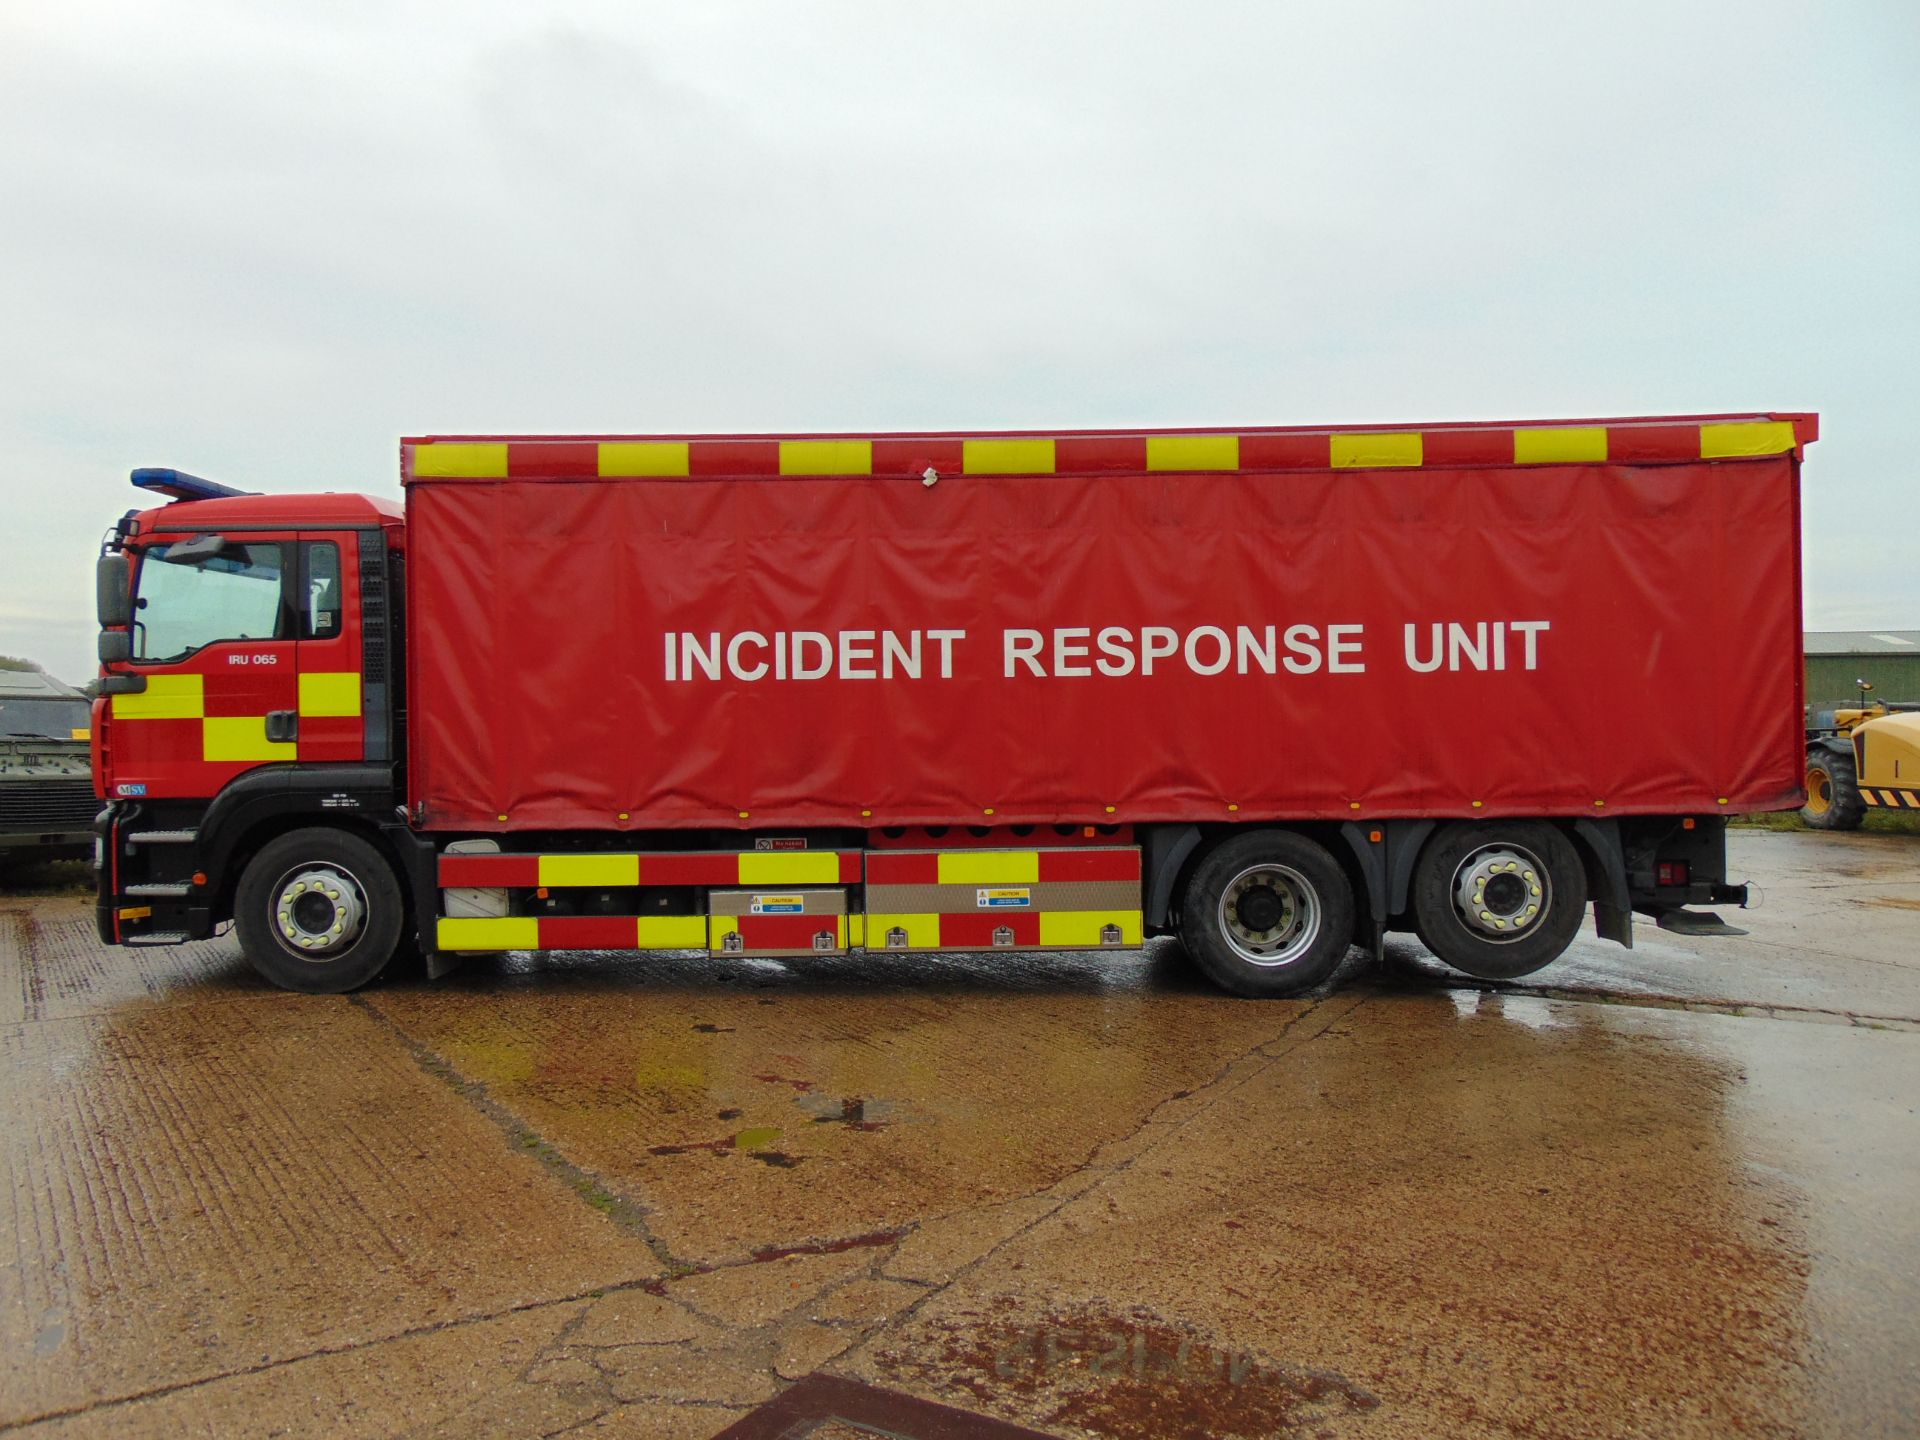 2004 MAN TG-A 6x2 Rear Steer Incident Support Unit - Image 4 of 27